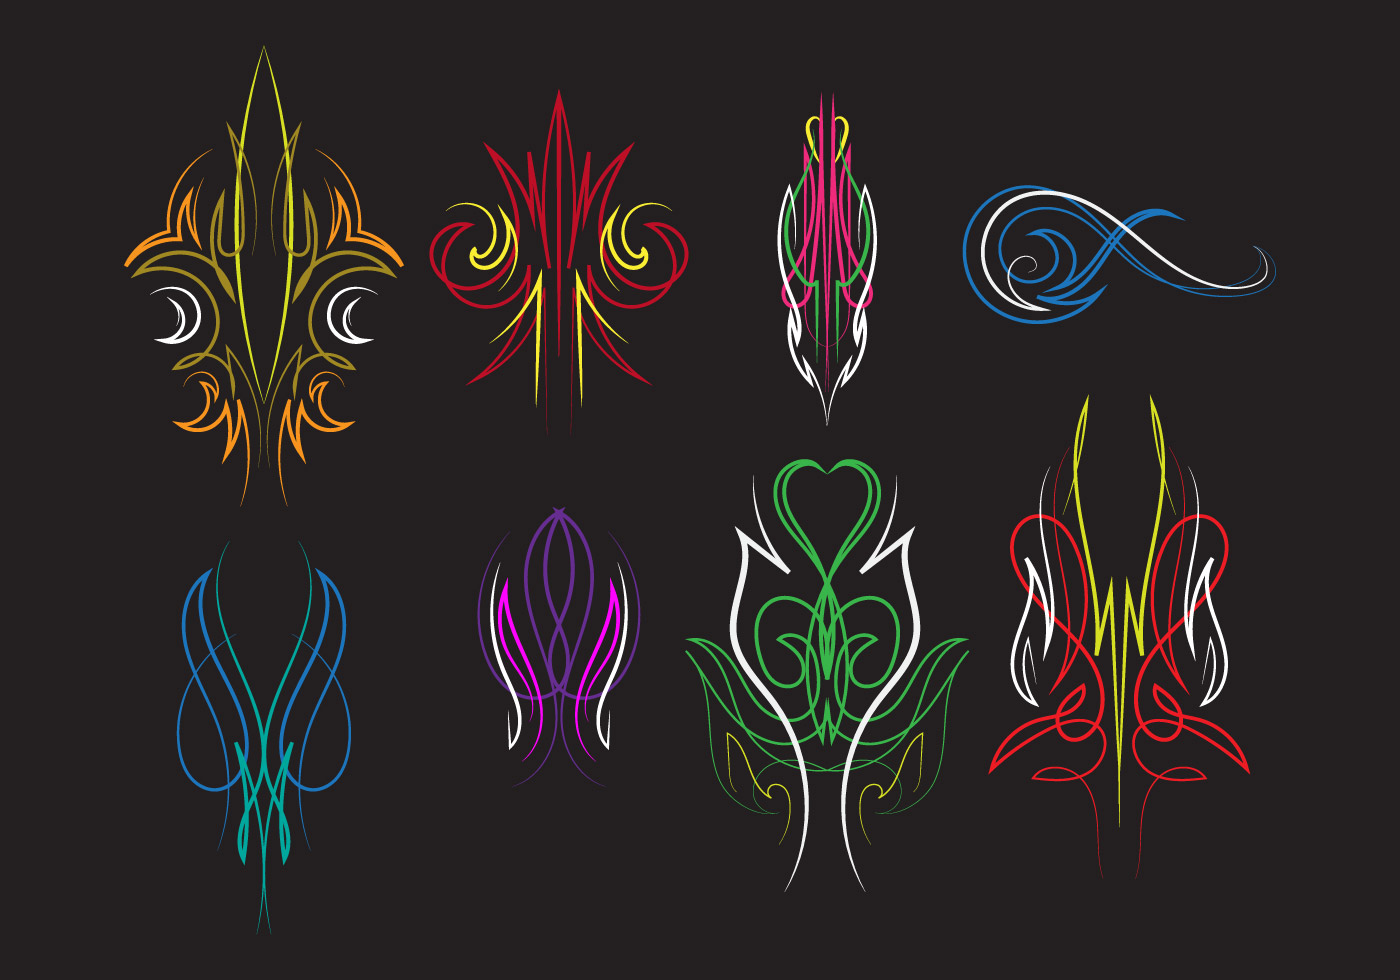 Download the Pinstripes Ornament Vectors 121868 royalty-free Vector from Ve...